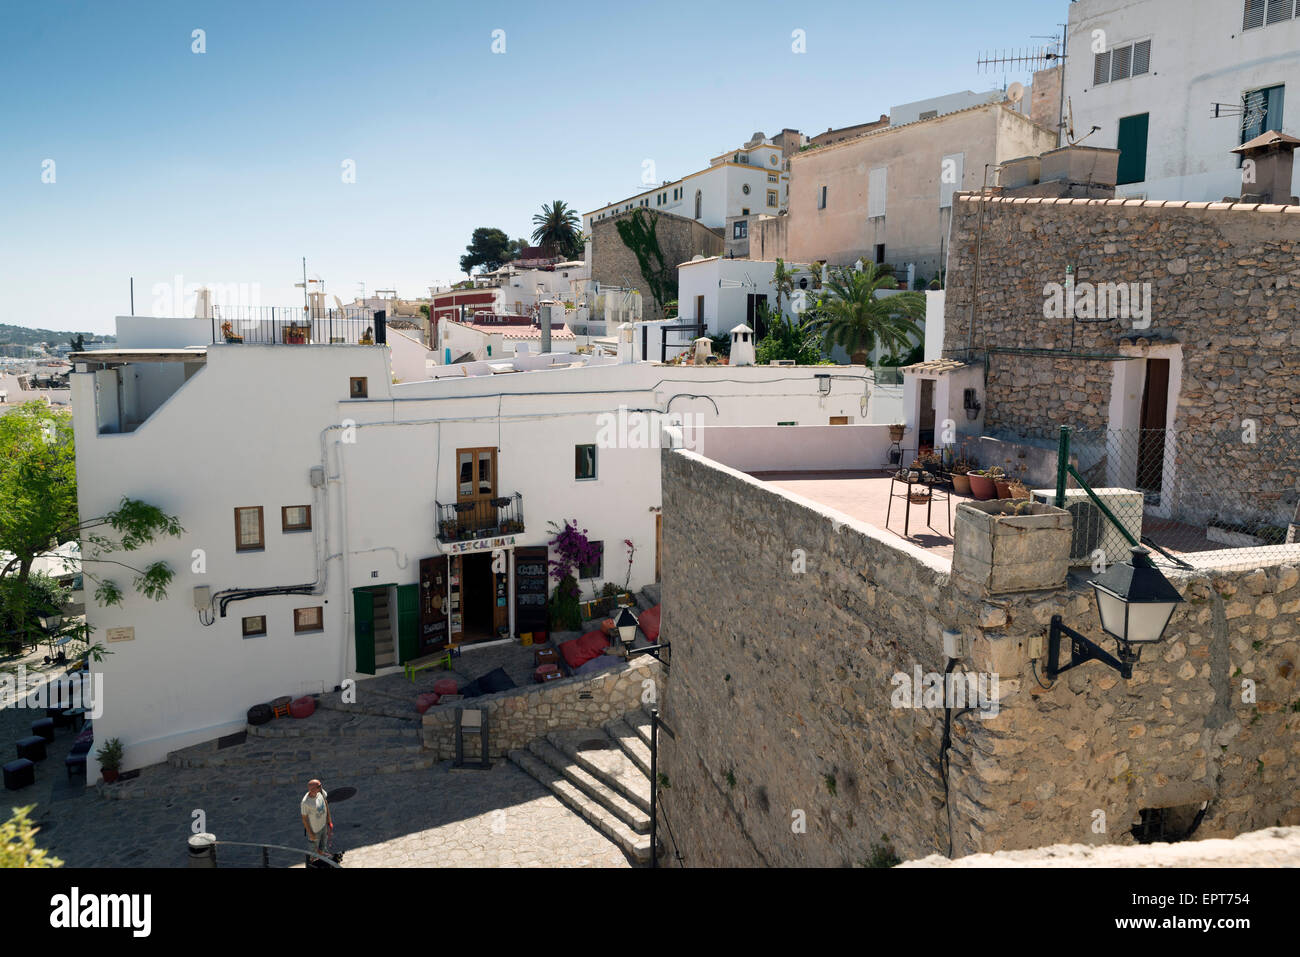 IBIZA, SPAIN - MAY 15, 2015: Ibiza Old Town. A picturesque street of the old town of Ibiza, with its whitewashed houses Stock Photo